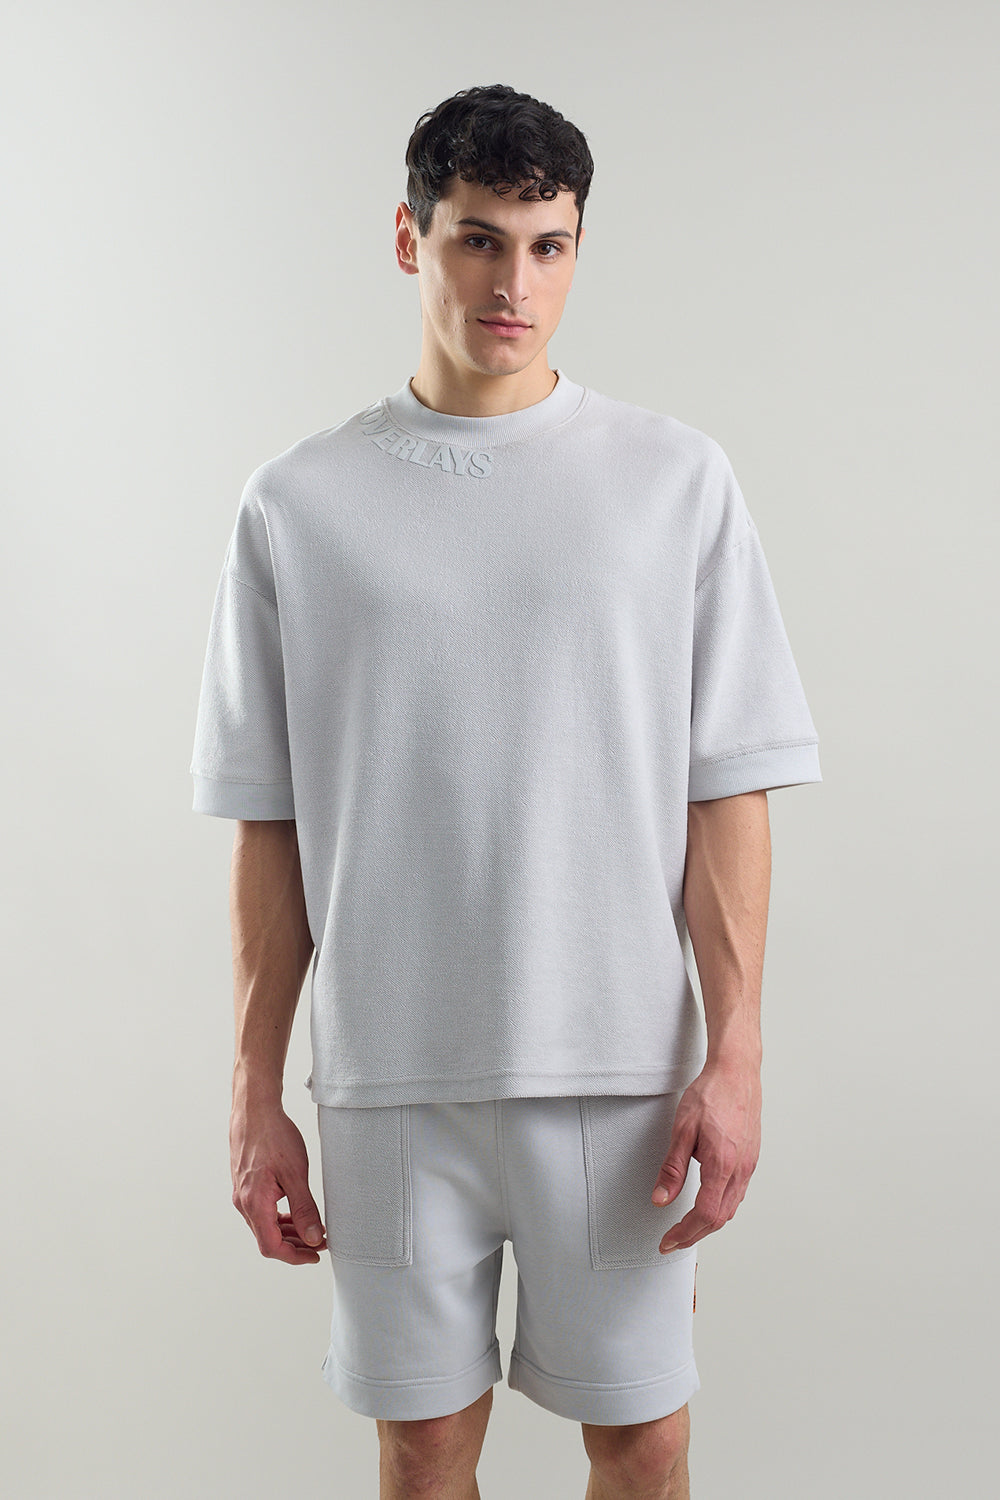 Textured Arc Grey Oversized Fit T-shirt